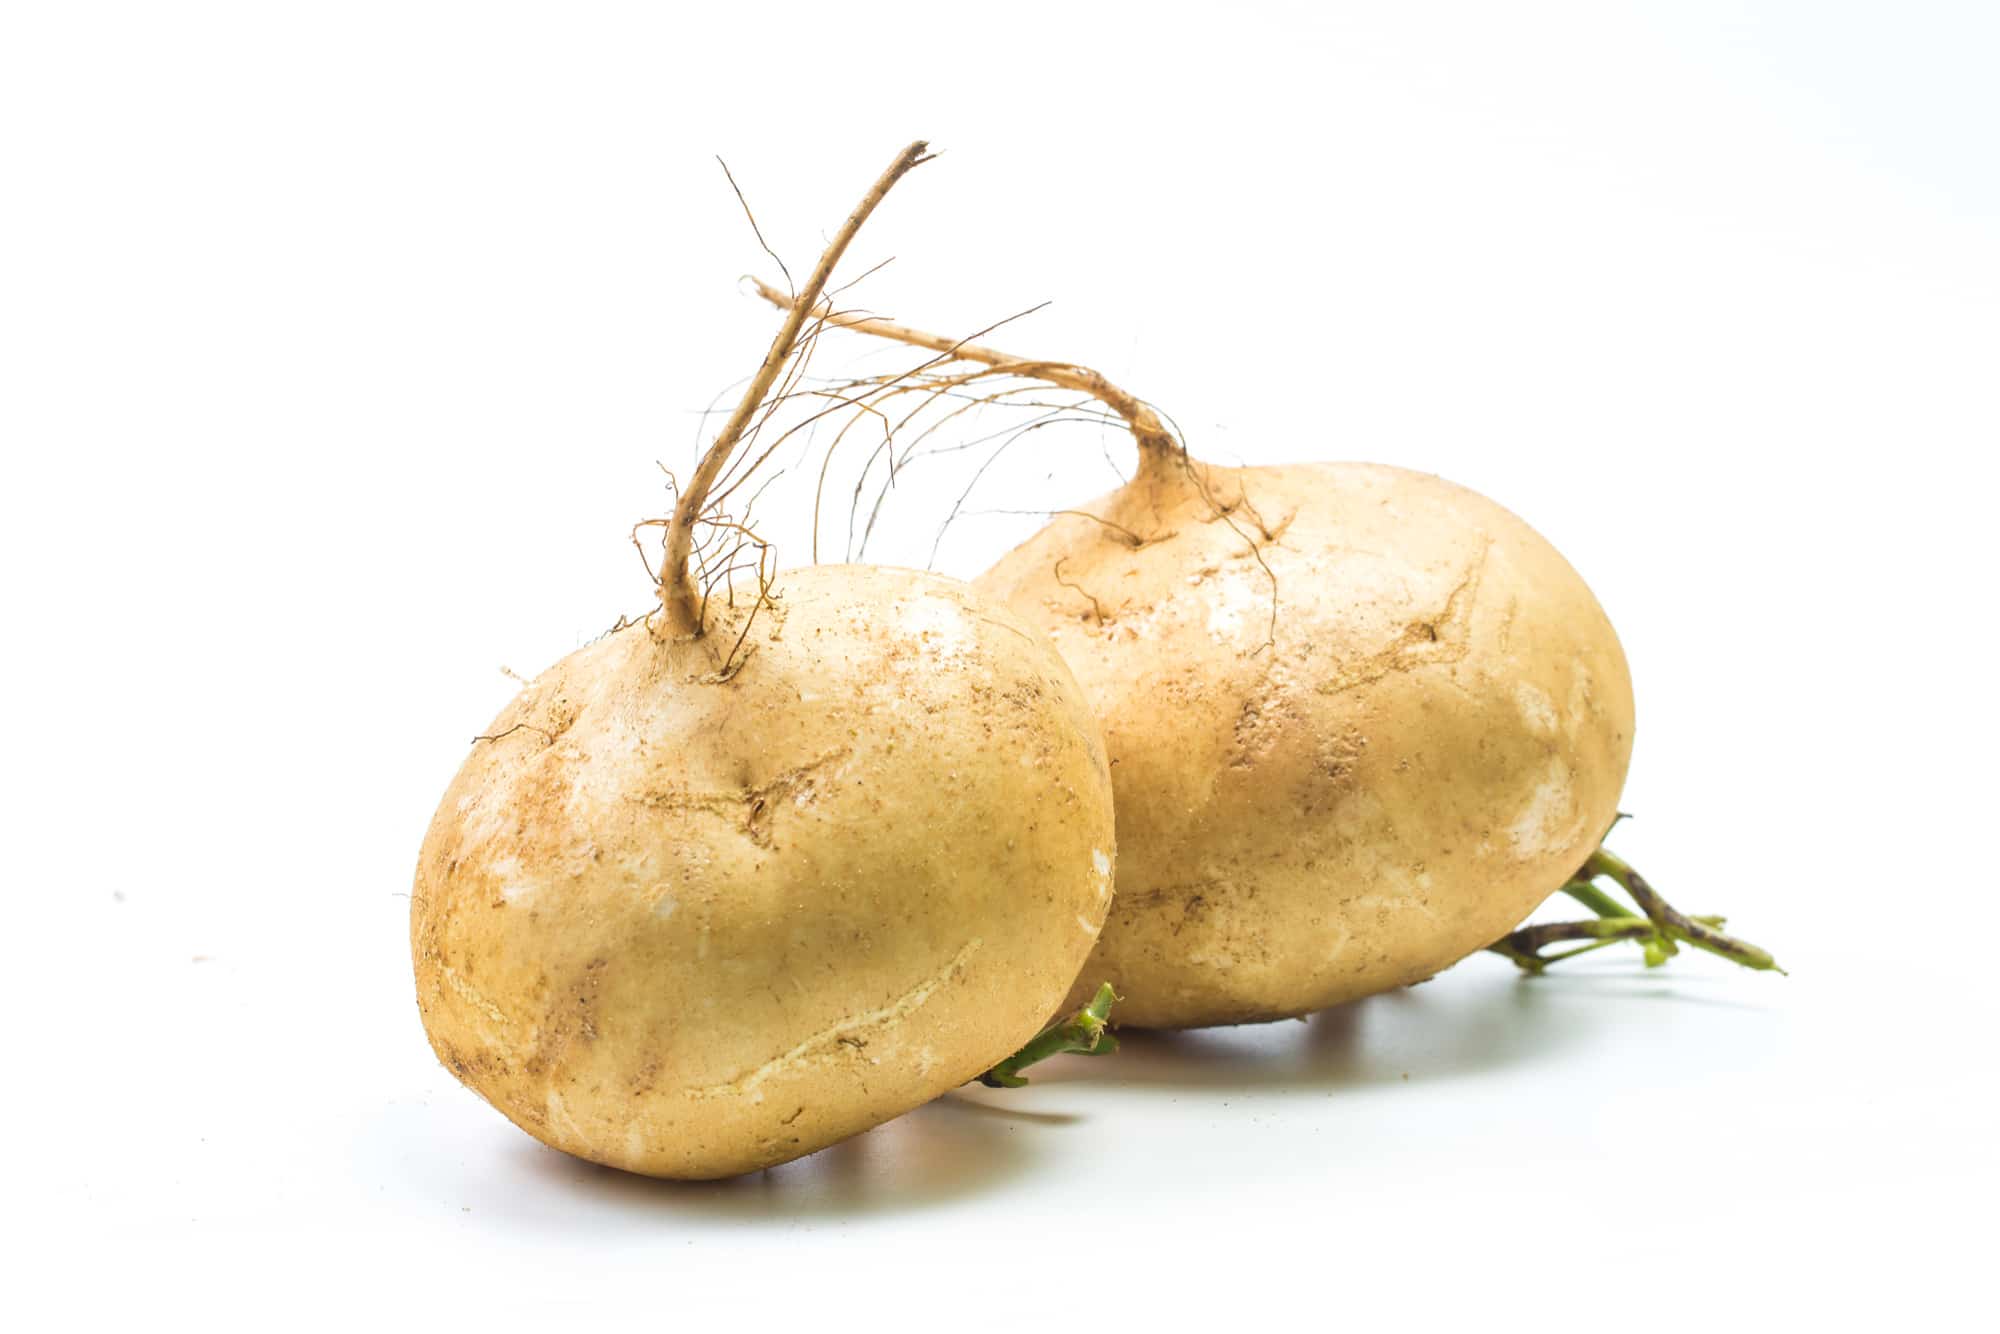 Jicama: A Healthy and Nutritious Root